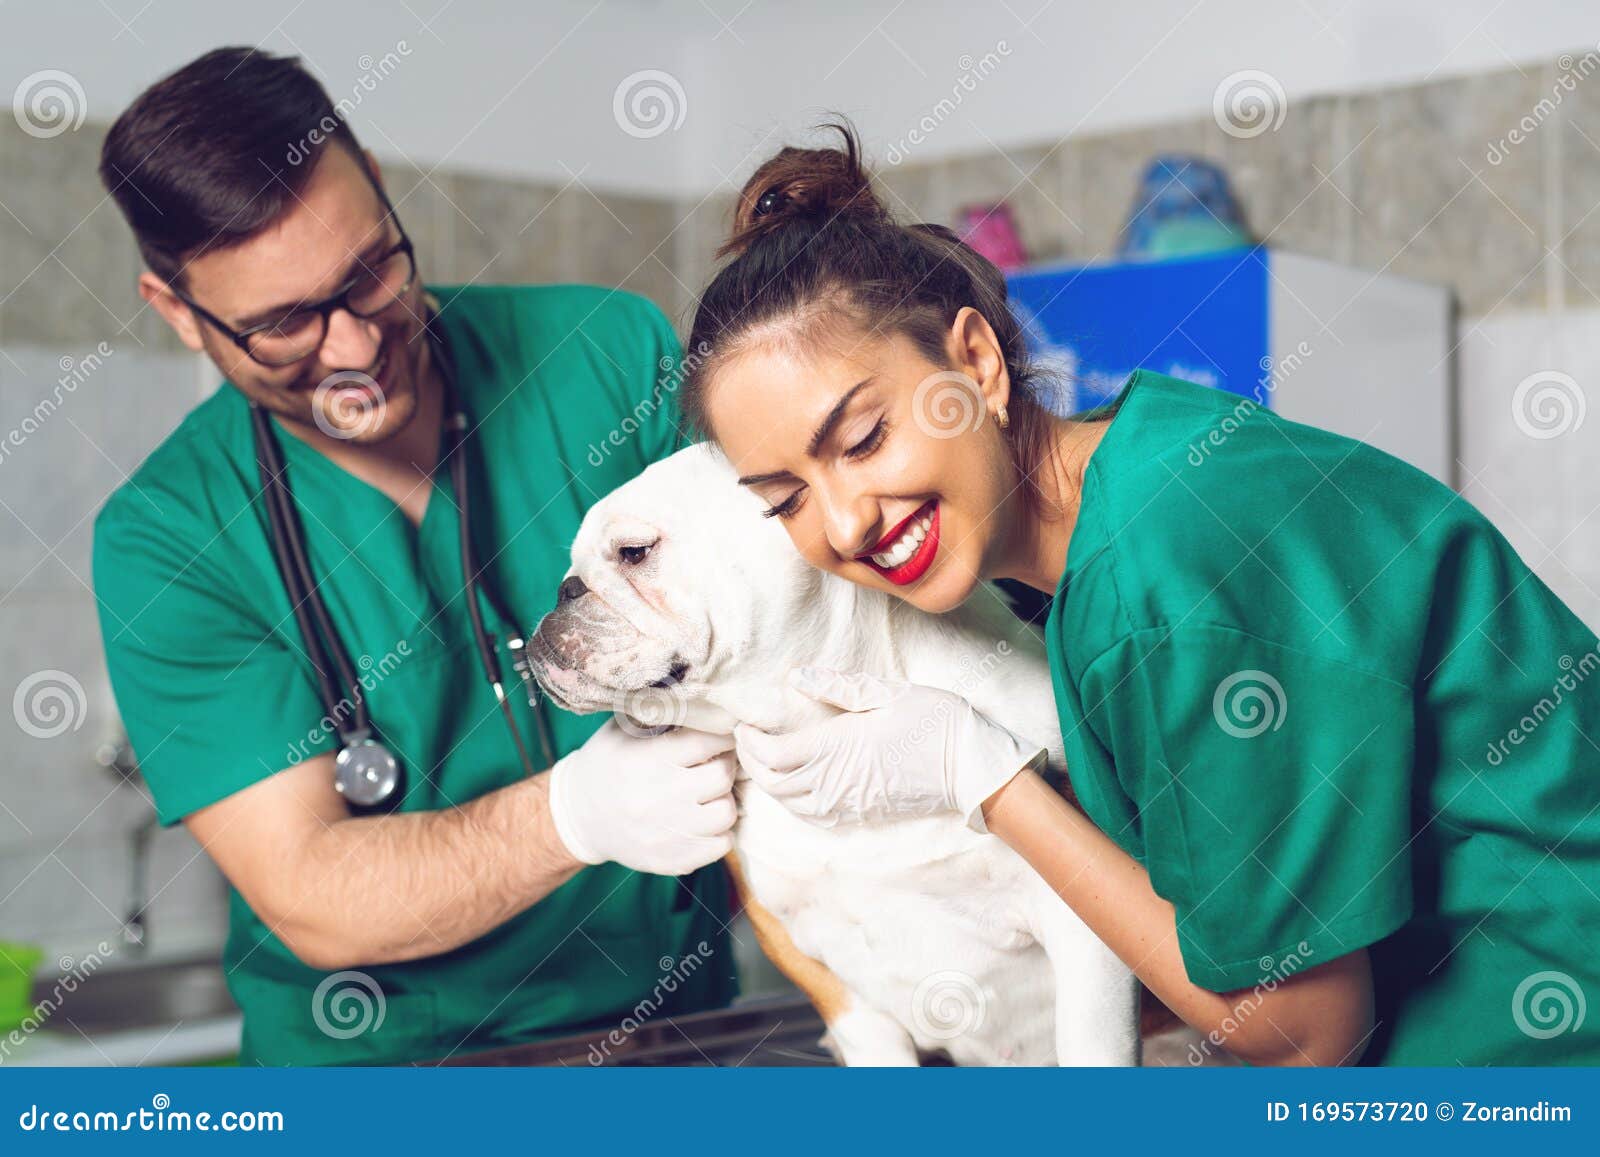 Two Veterinary Doctors With Dog During The Examination In Veterinary